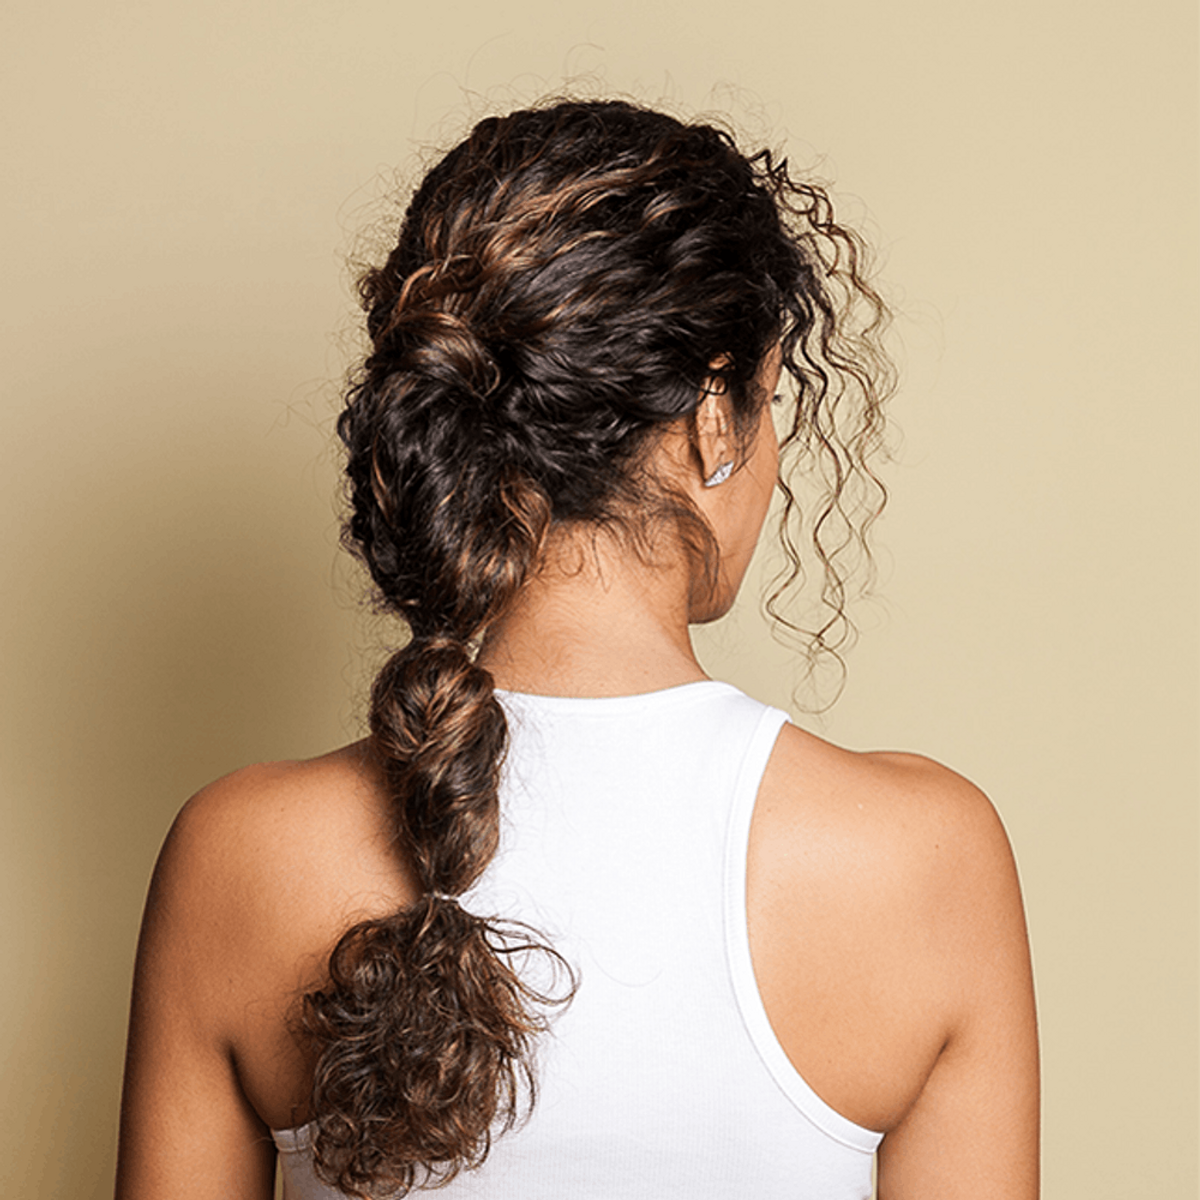 #SquadHairGoals: The Faux Braid for Curly Hair